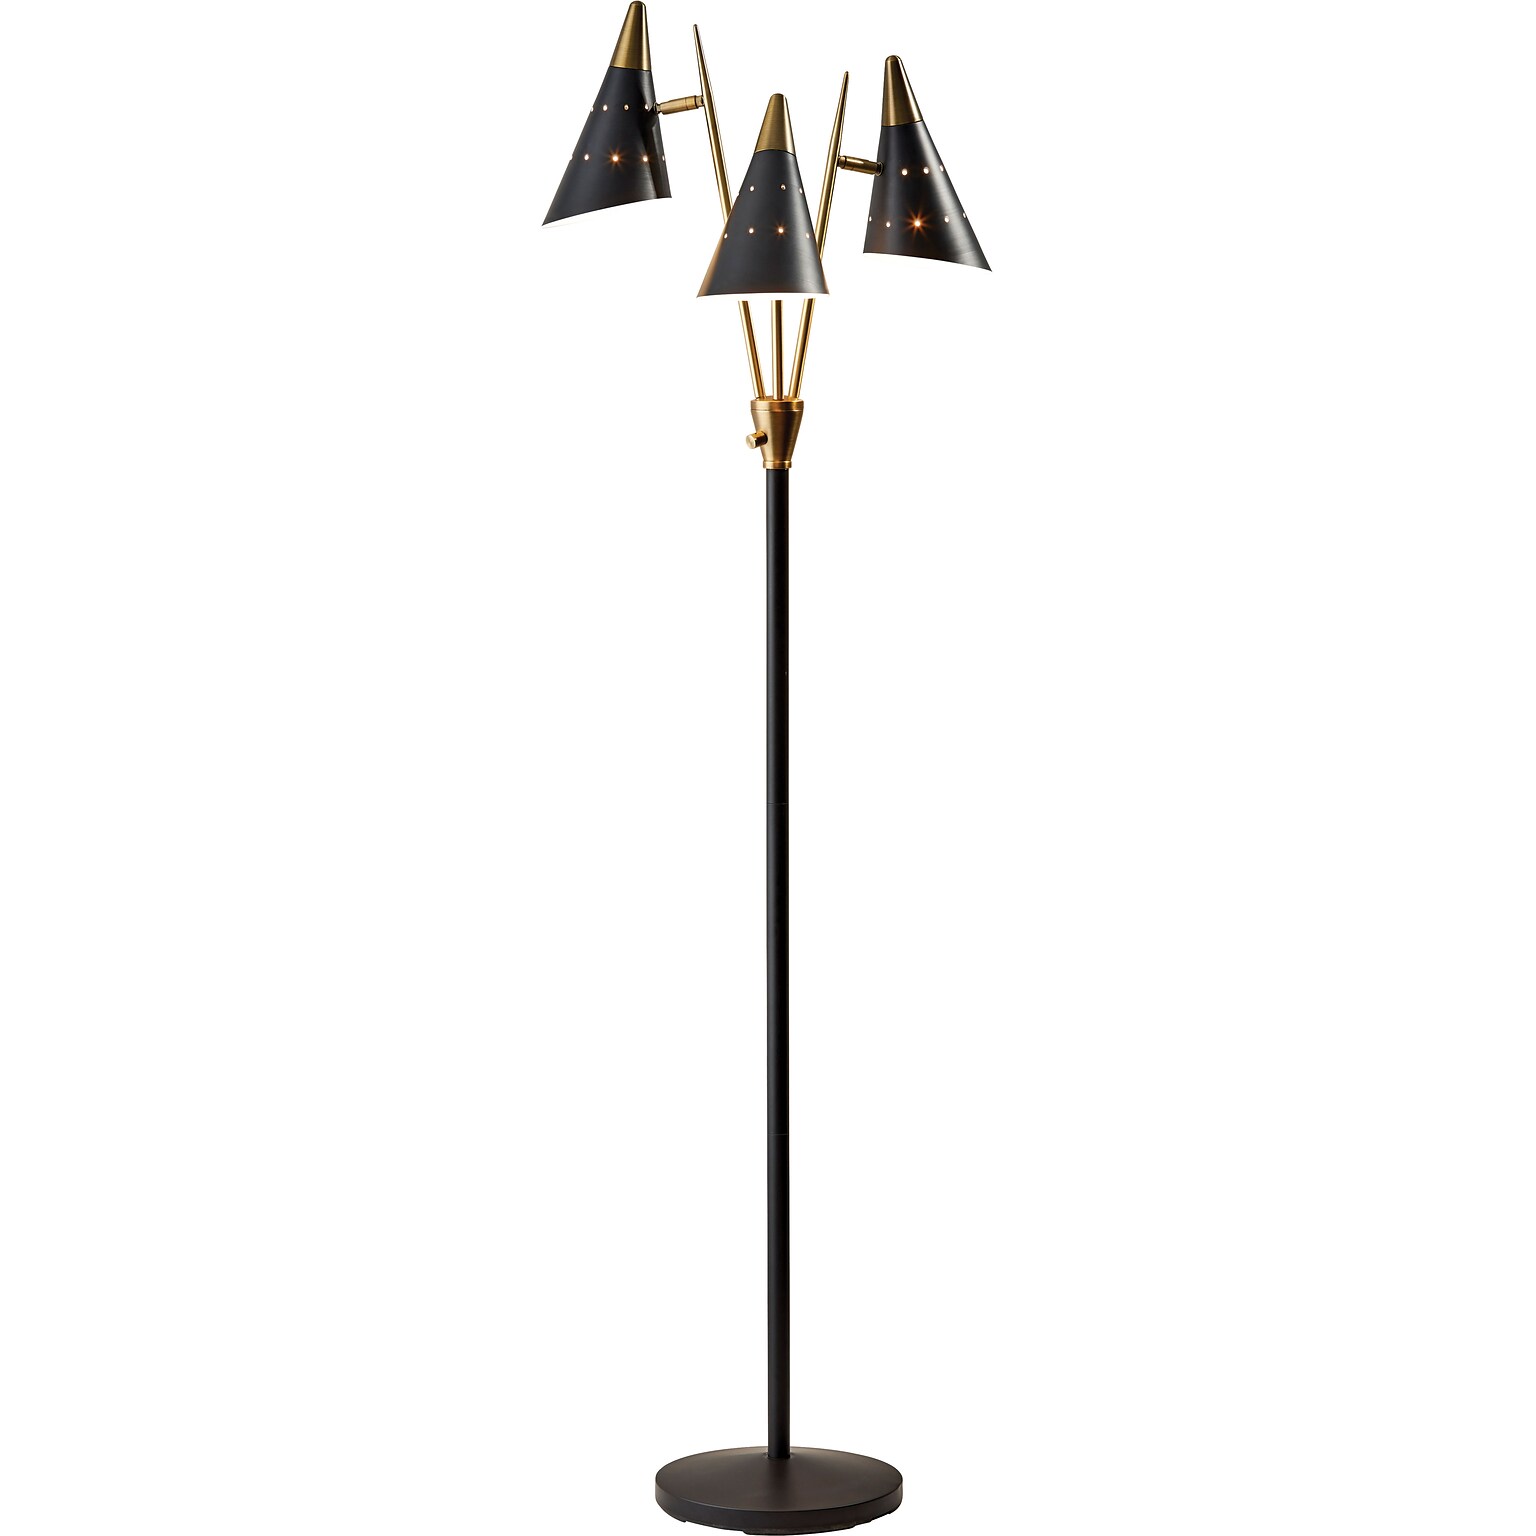 Adesso® Nadine 66H Matte Black and Antique Brass 3-Arm Floor Lamp with Matte Black Cone Shades (3249-01)